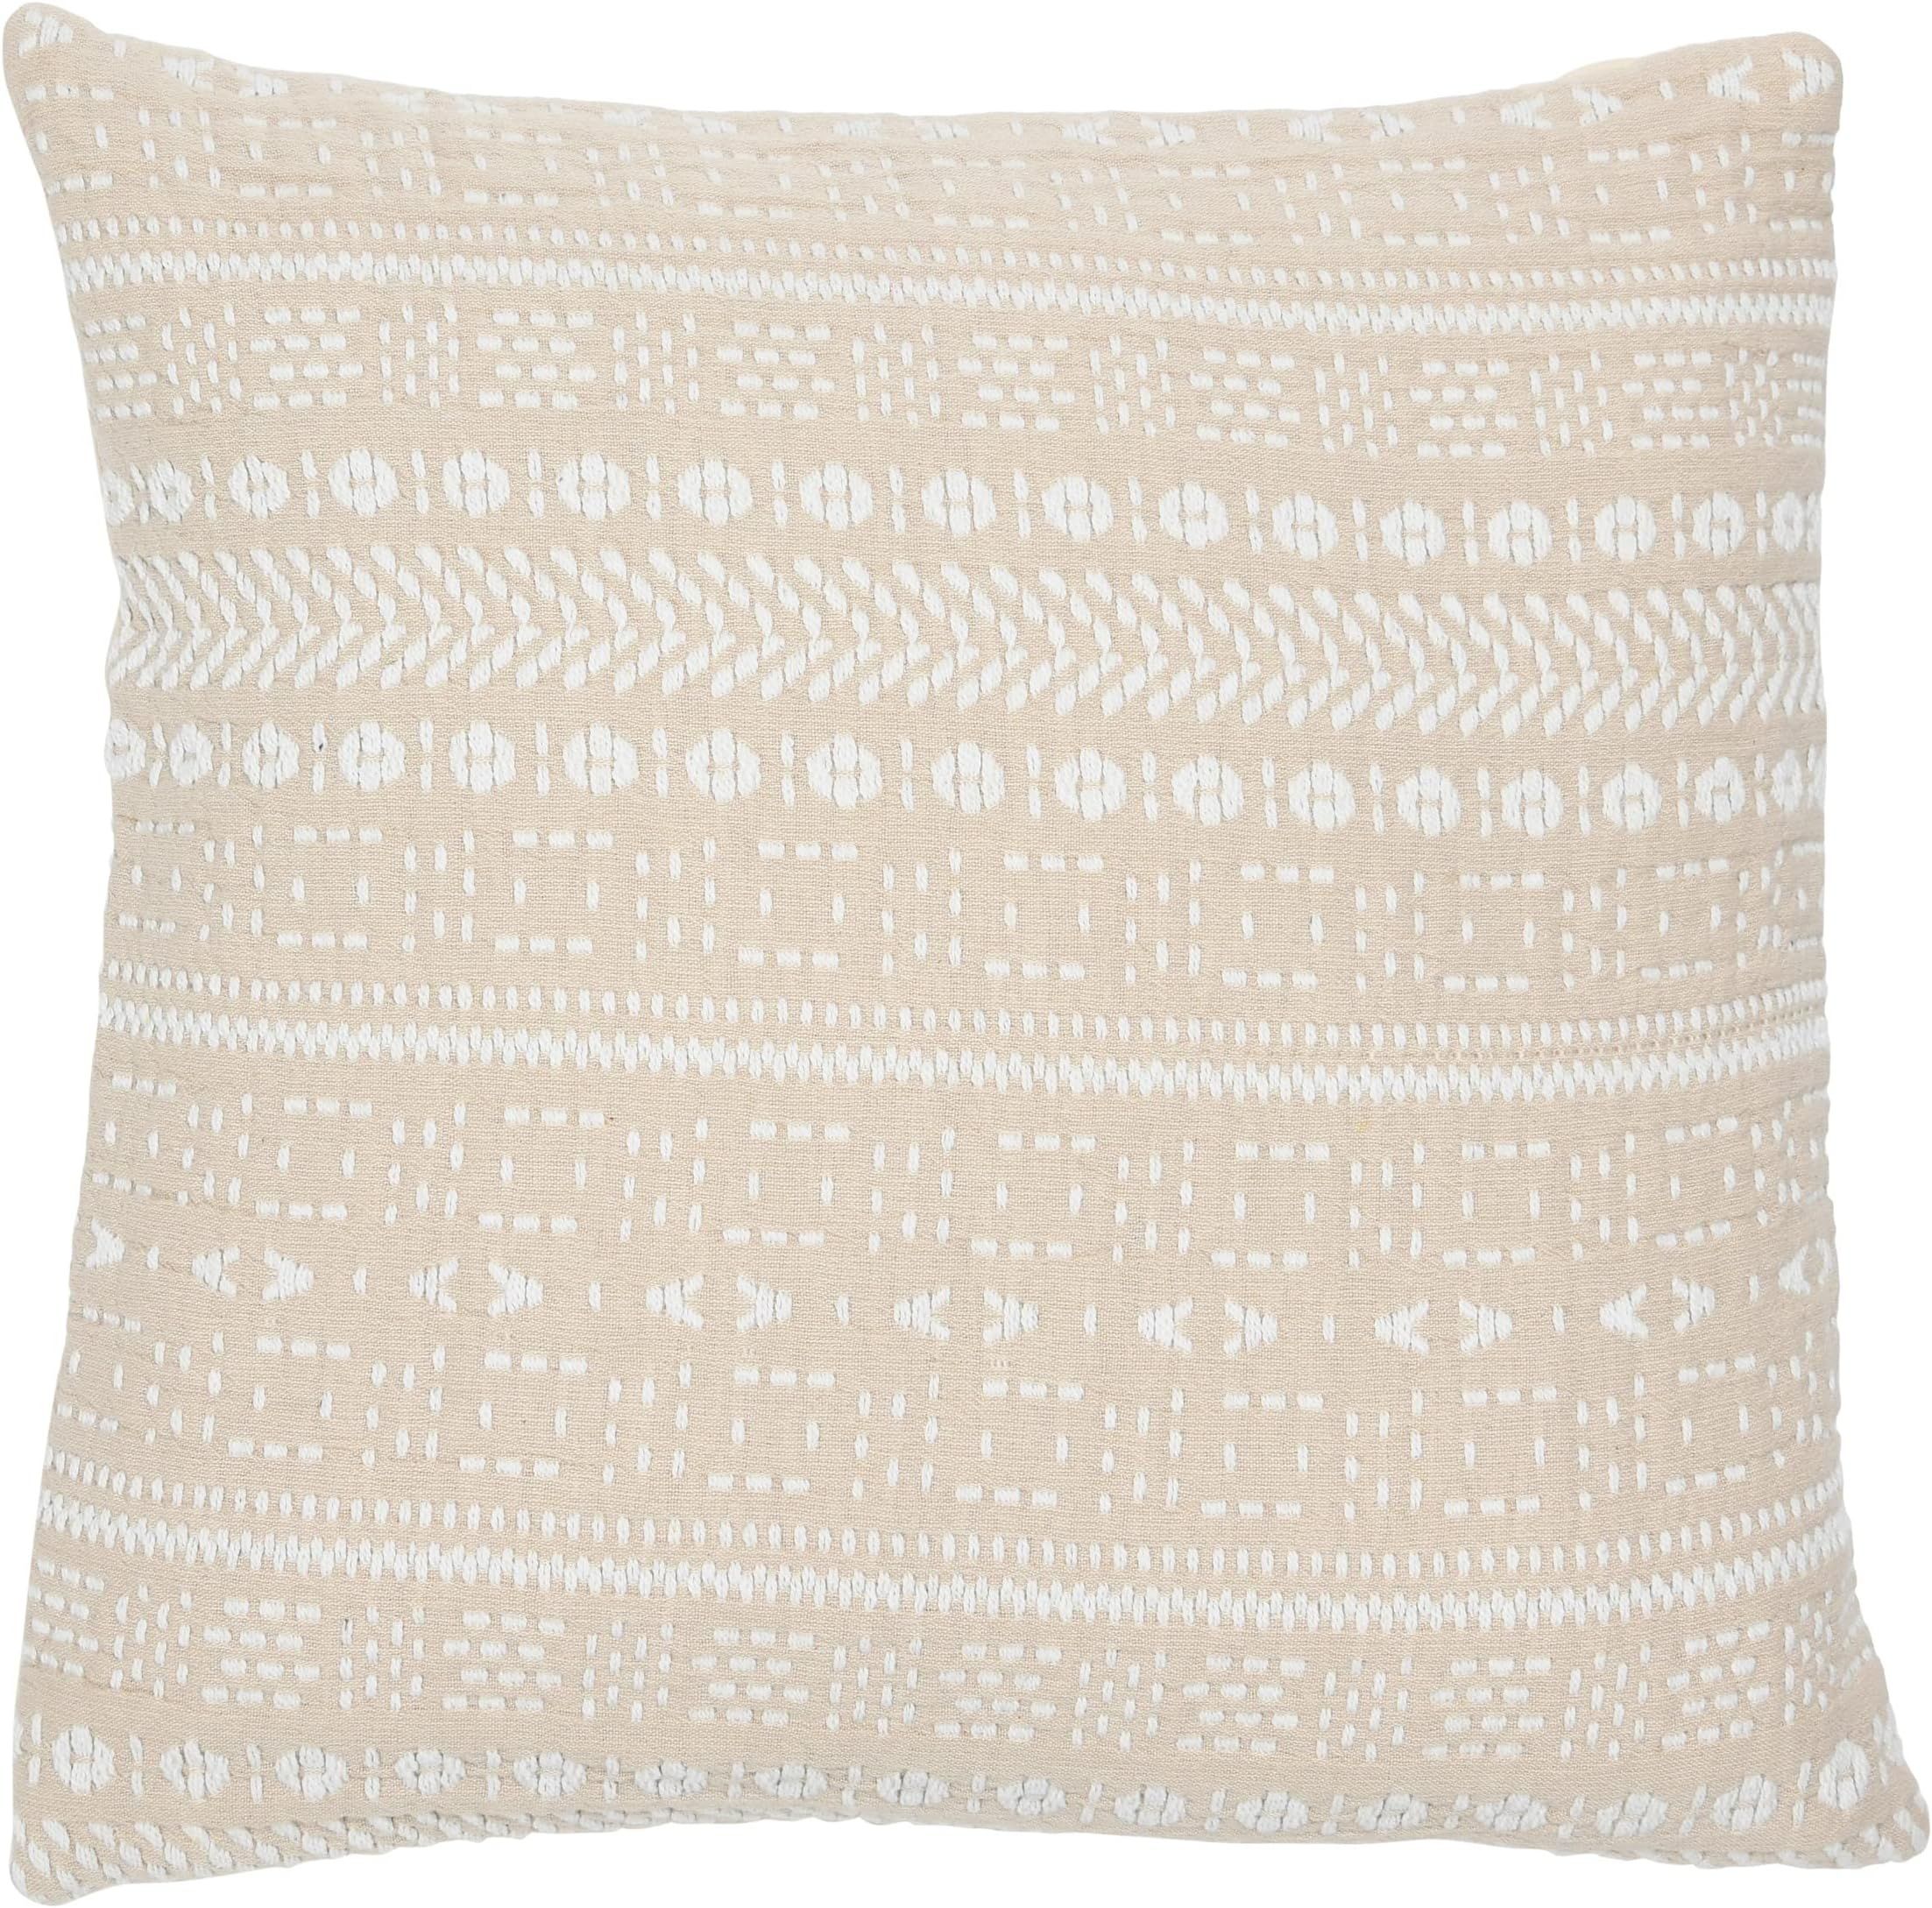 Creative Co-Op Woven Cotton Embroidered Pillow, 20" L x 20" W x 2" H, Beige | Amazon (US)